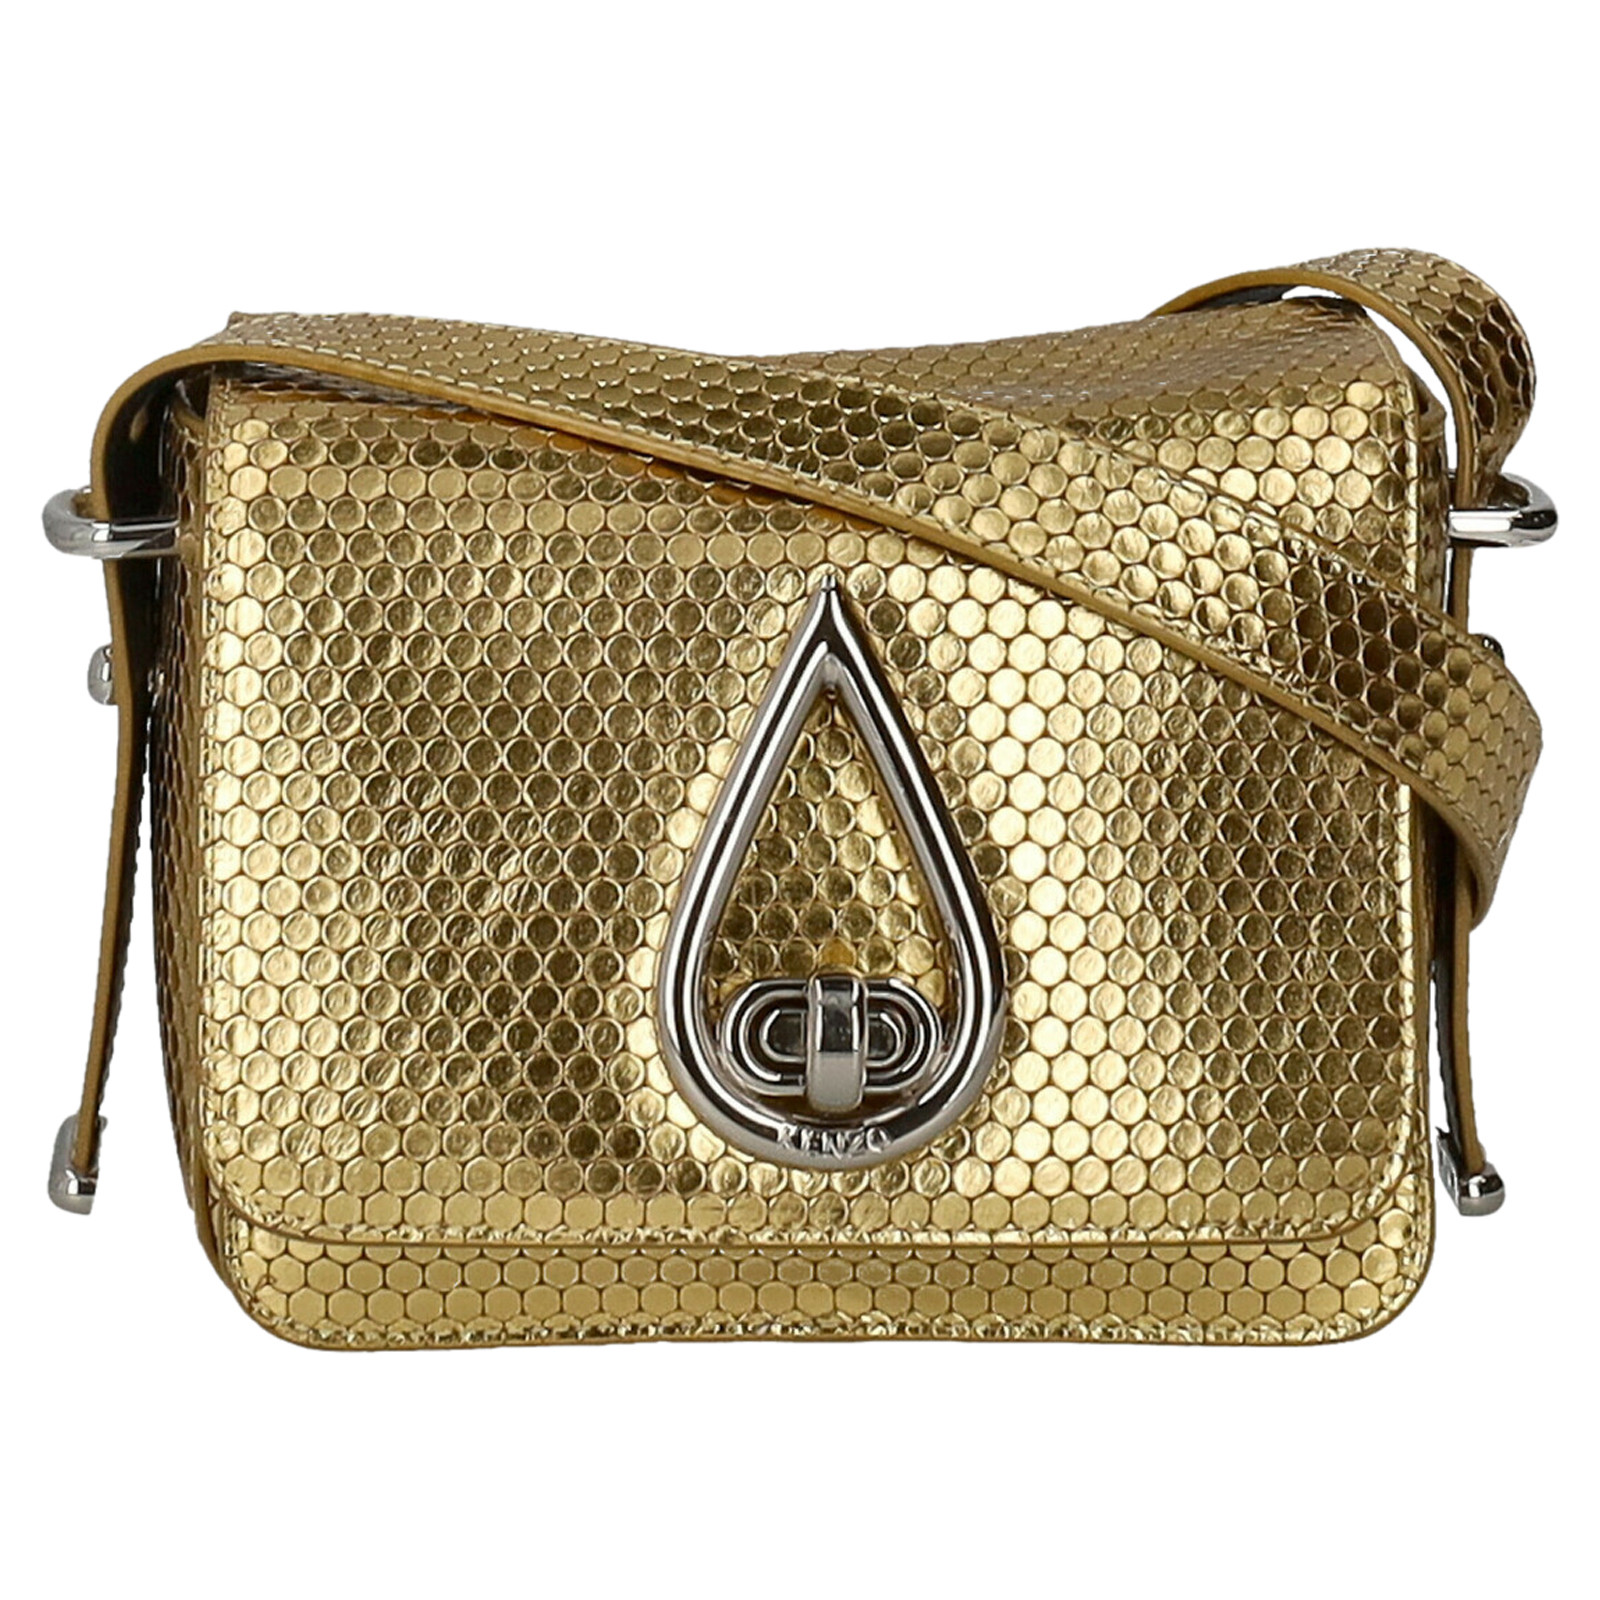 KENZO Women's Shoulder bag Leather in Gold | Second Hand